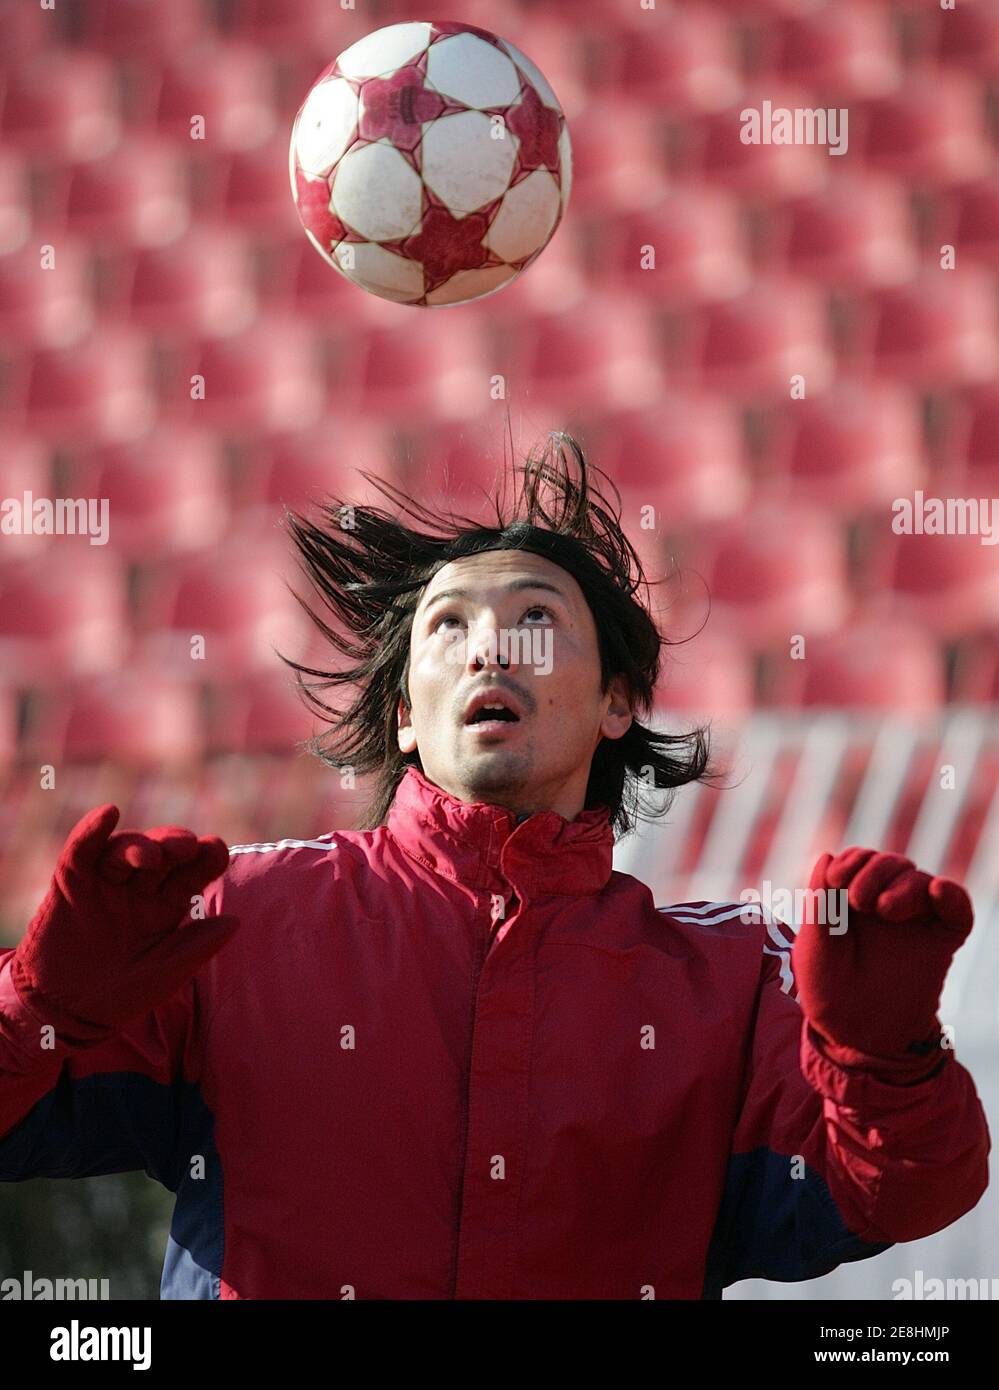 Japanese national soccer team striker Takayuki Suzuki plays with a ball during a training session January 27, 2006, in Belgrade after signing a two-year contract with former European champions Red Star Belgrade soccer club. REUTERS/Ivan Milutinovic Stock Photo